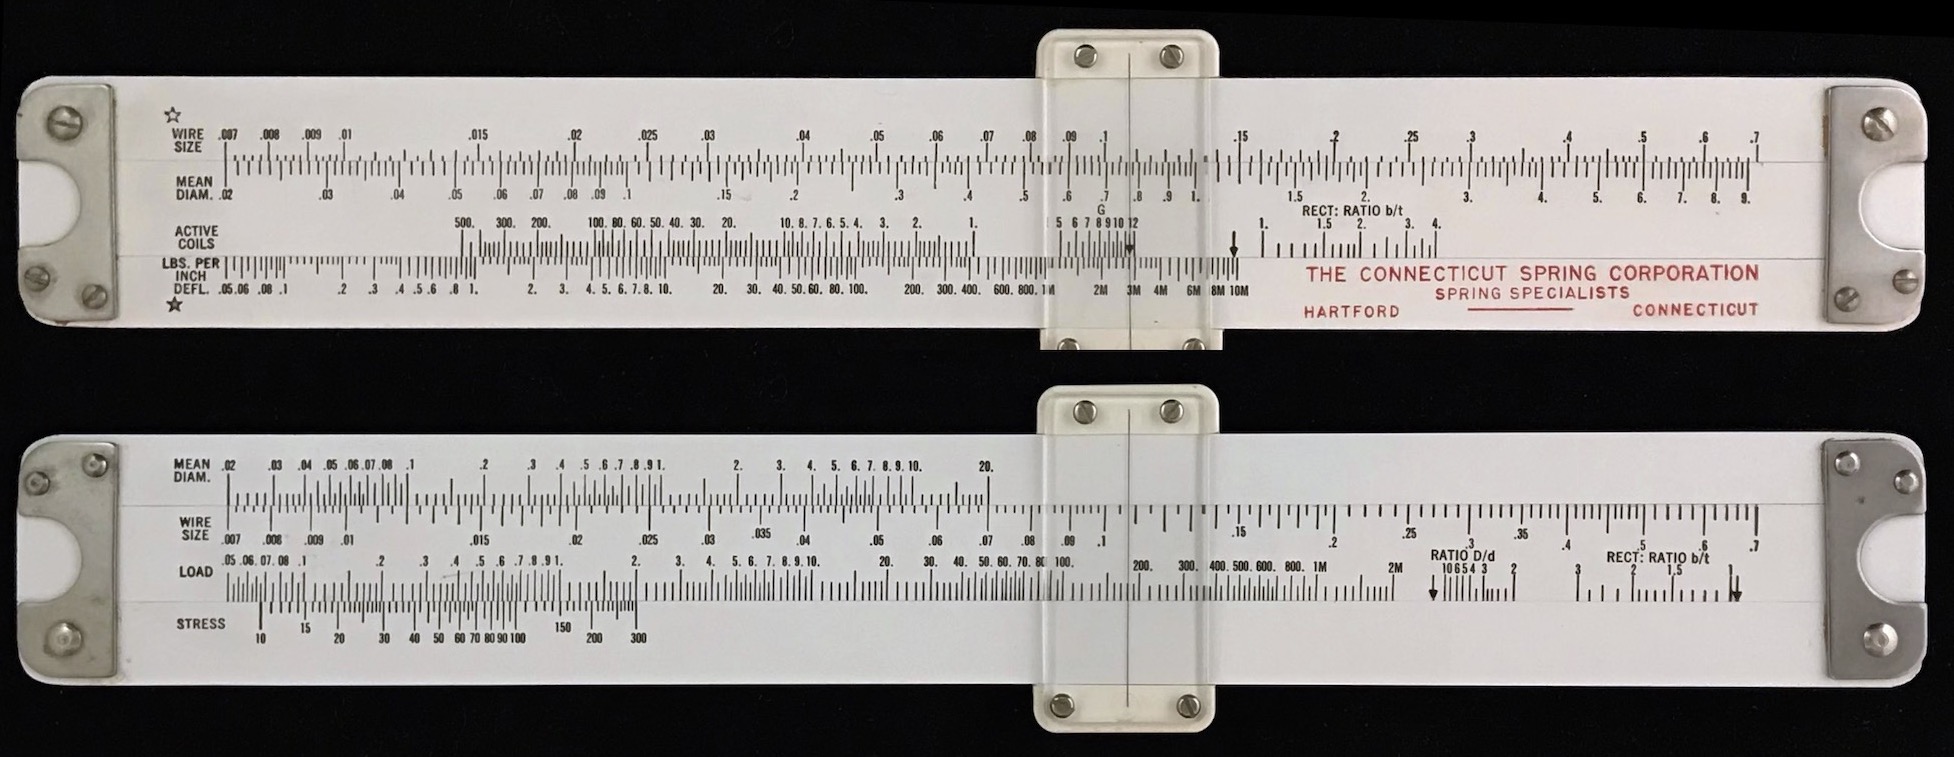 Acu-Rule spring calculation slide rule, made for Connecticut Spring Corp, 1955.